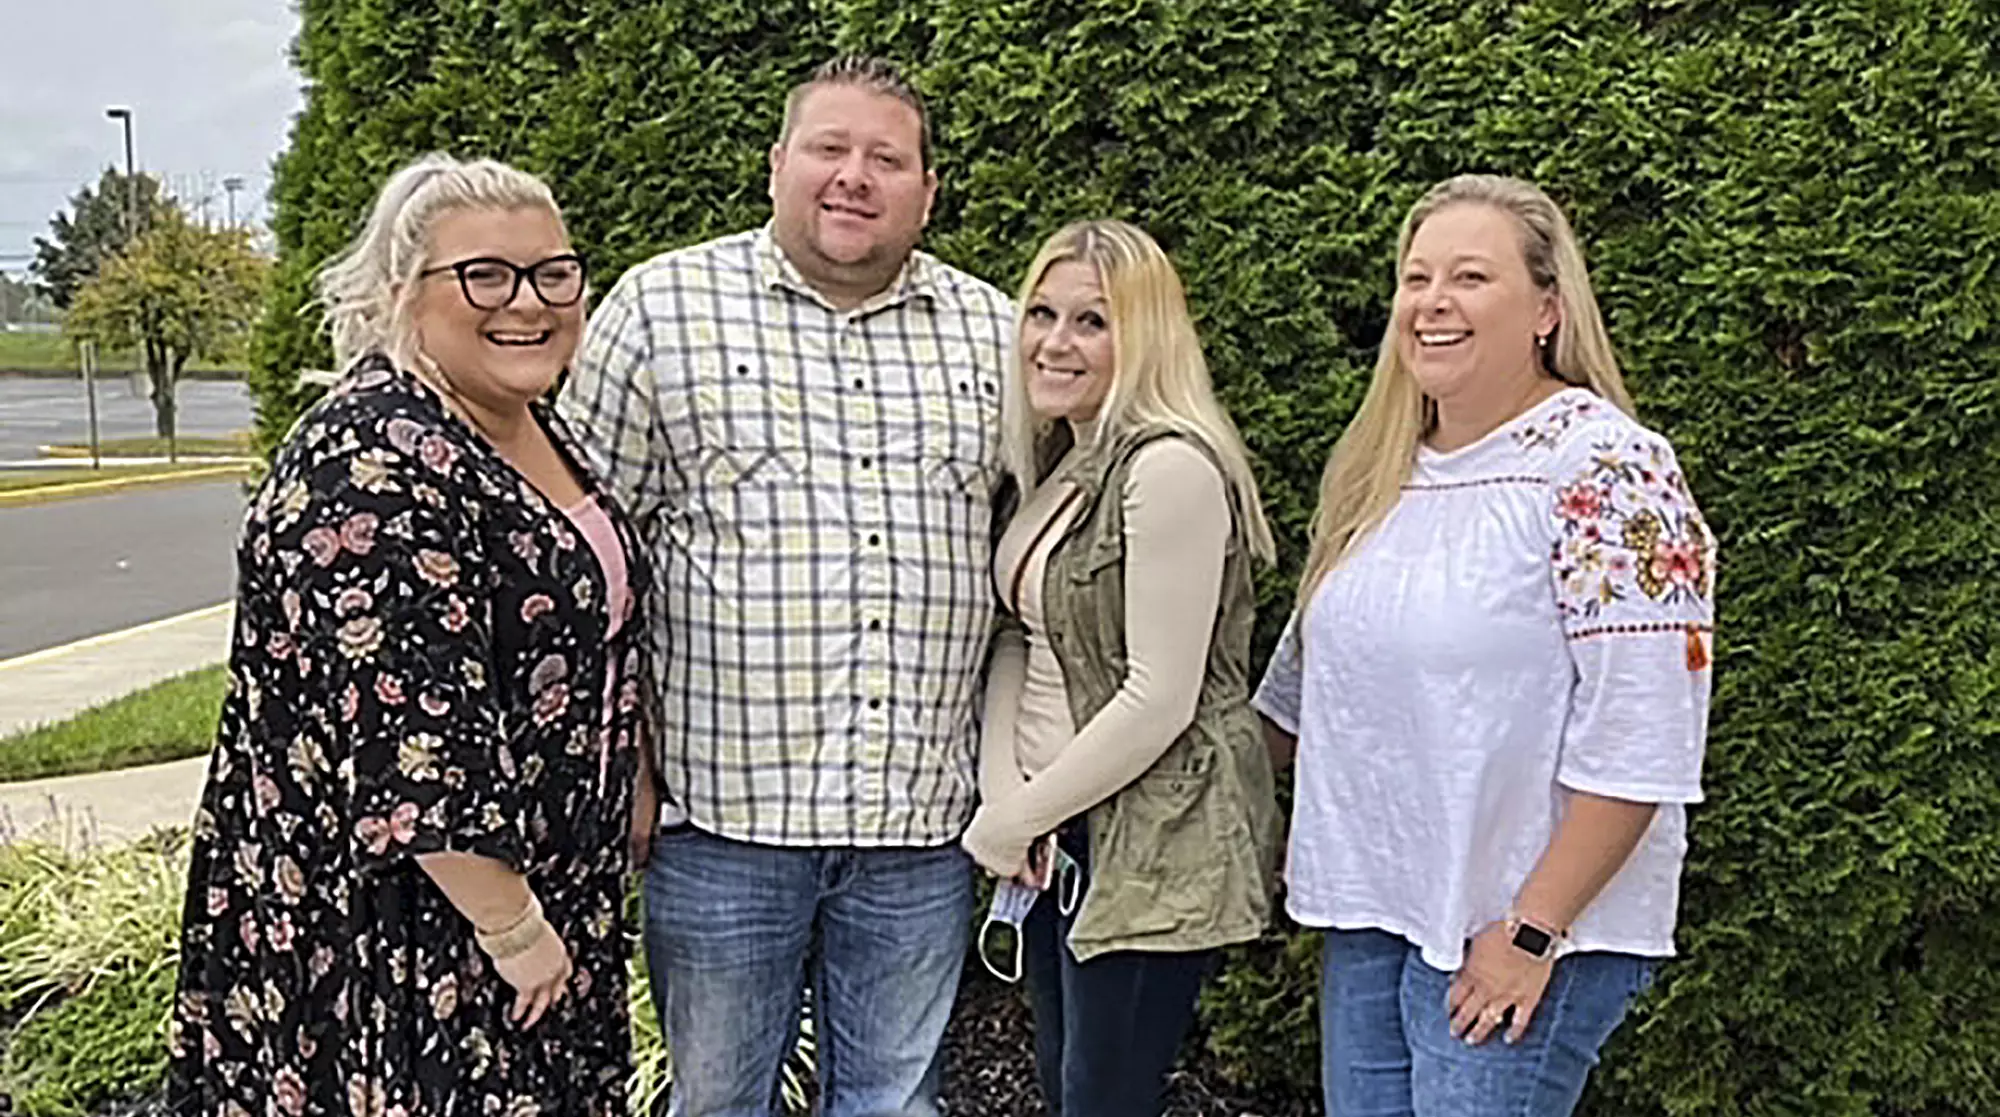 Jennifer Lannon, second from right, with her brother Chris Whitman, second from left, and sisters Sarah Whitman, far left, and Kim Bermudez.